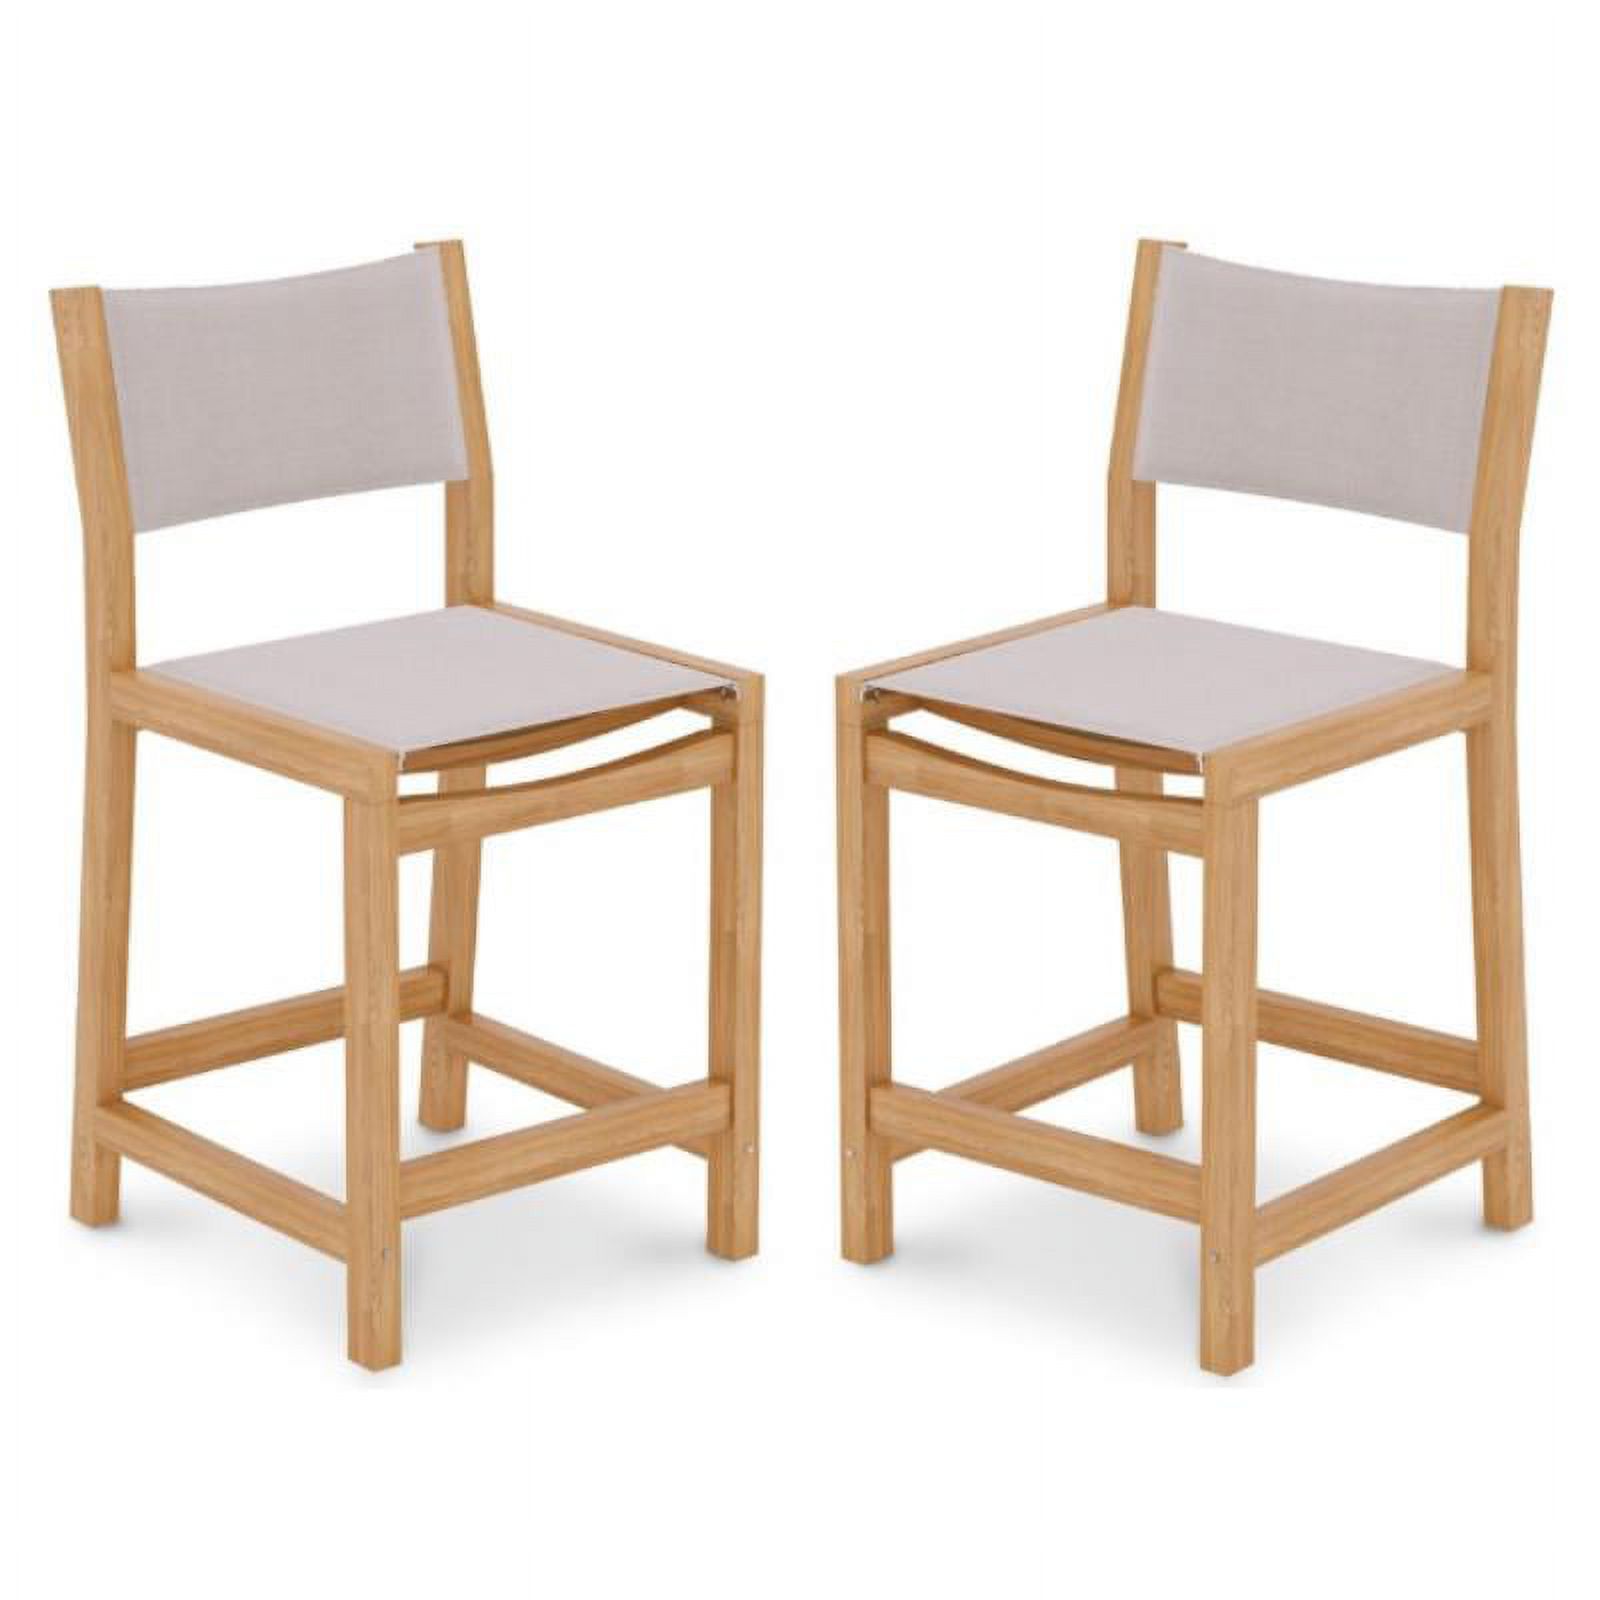 Home Square 26" Teak Wooden Patio Counter Stool in Natural and White - Set of 2 - image 1 of 4